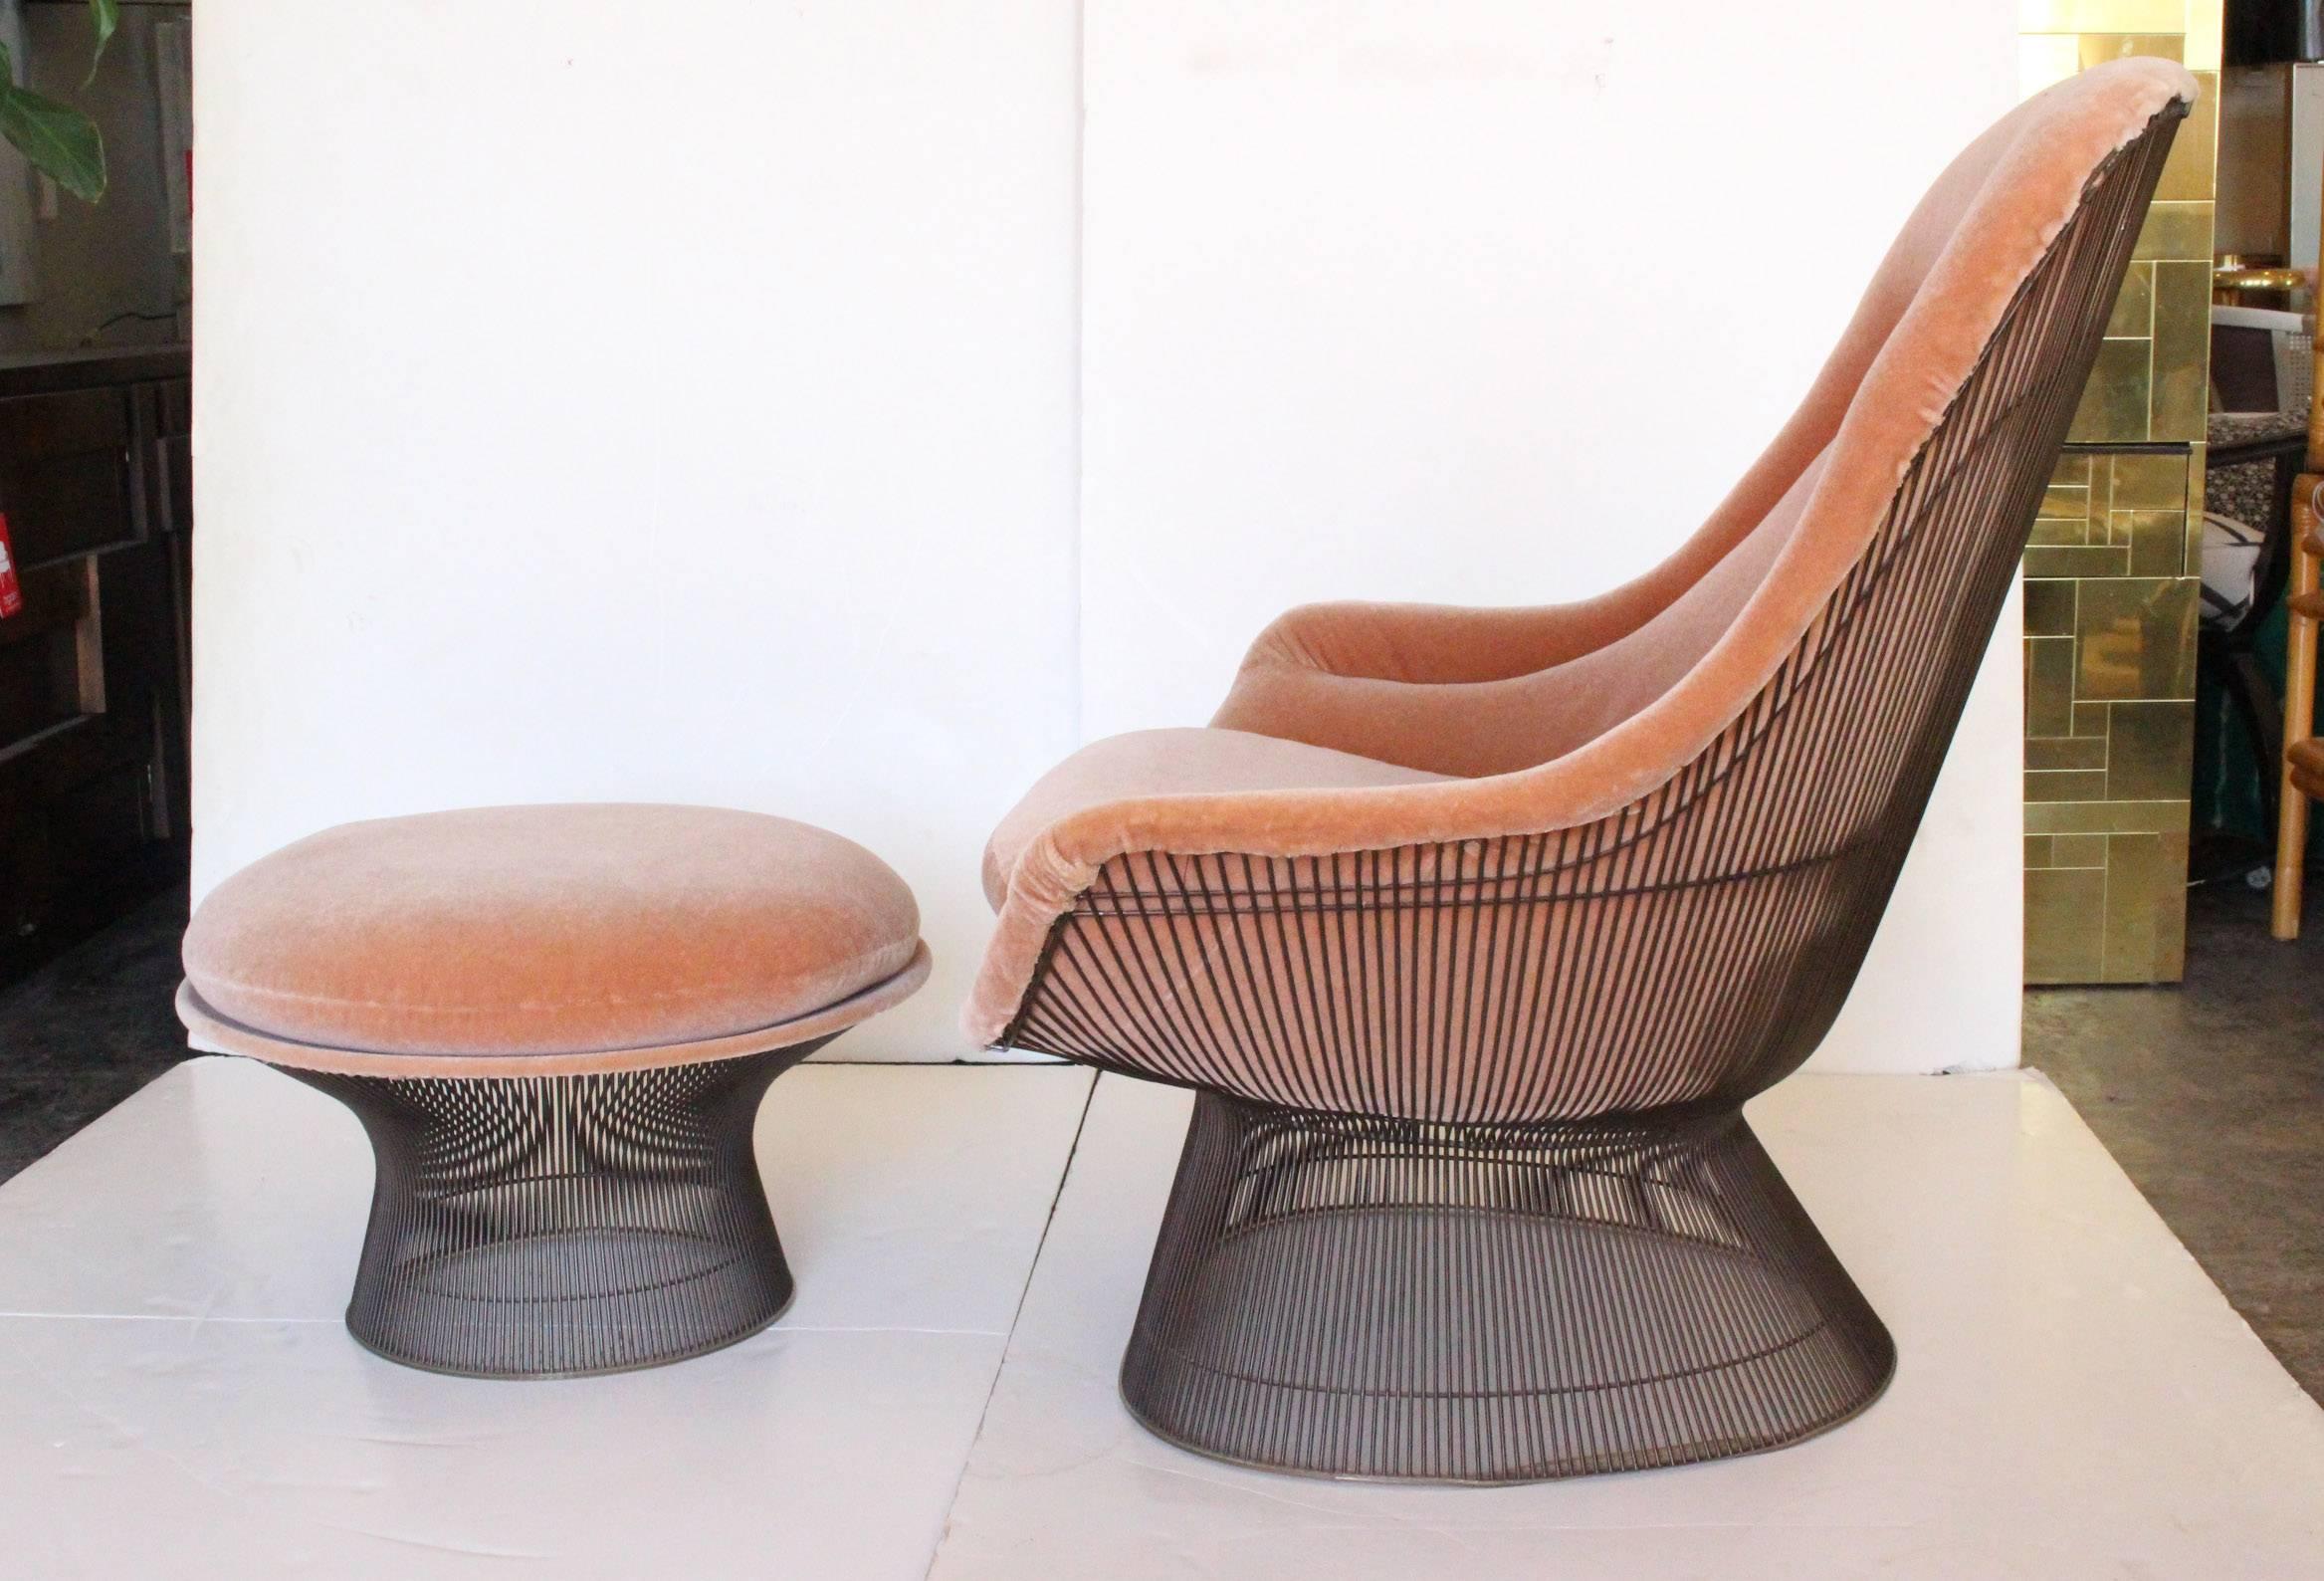 Bronze lounge chair and ottoman by Warren Platner for Knoll upholstered in a peach mohair.

Dimension: 41.5